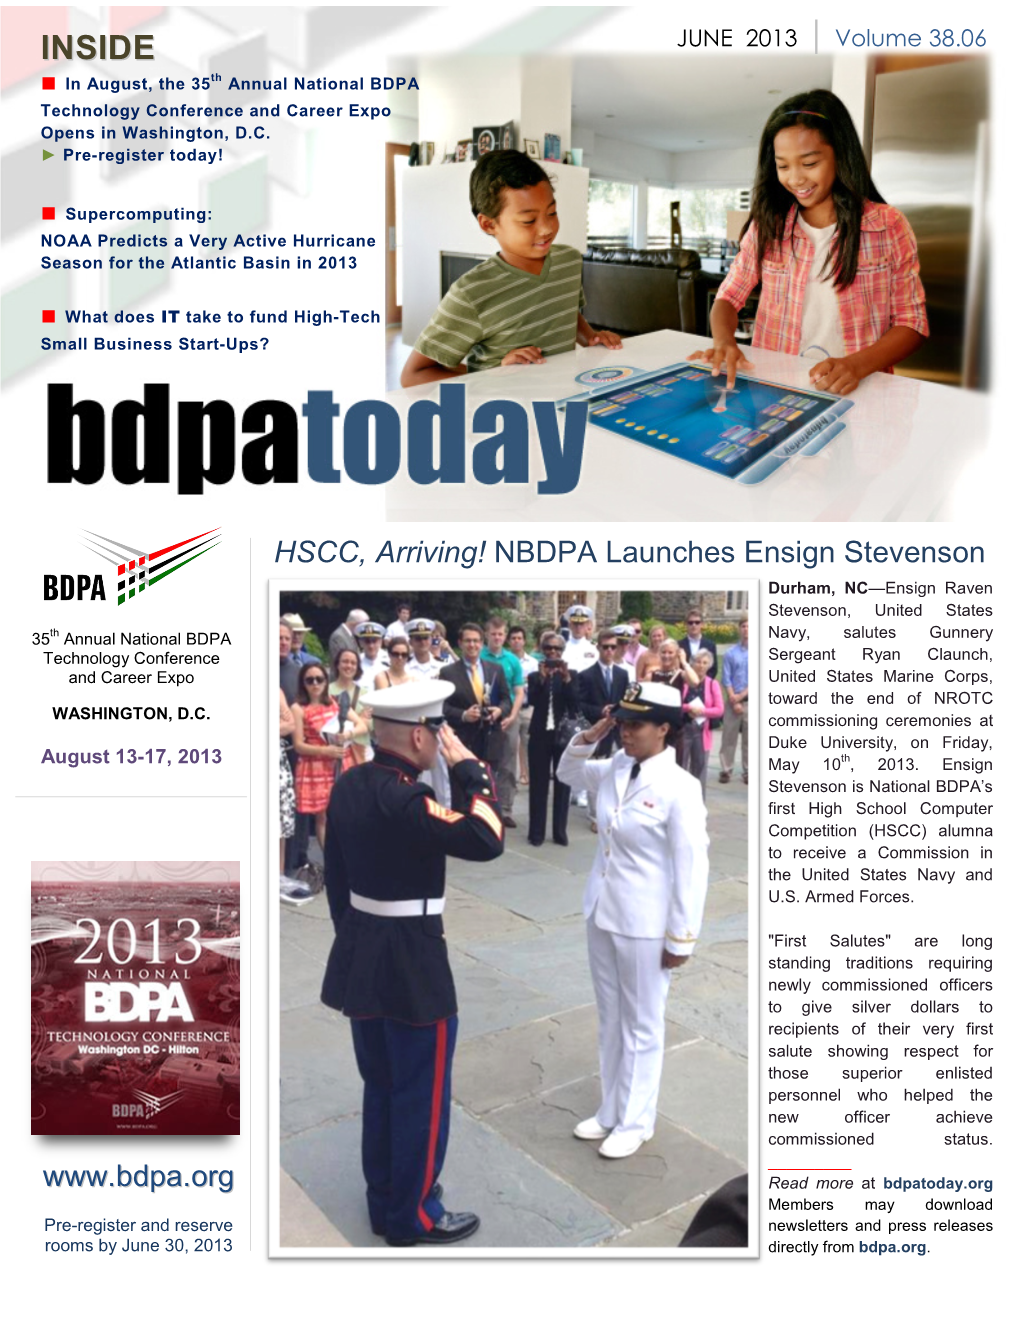 JUNE 2013 | Volume 38.06 ■ in August, the 35Th Annual National BDPA Technology Conference and Career Expo Opens in Washington, D.C